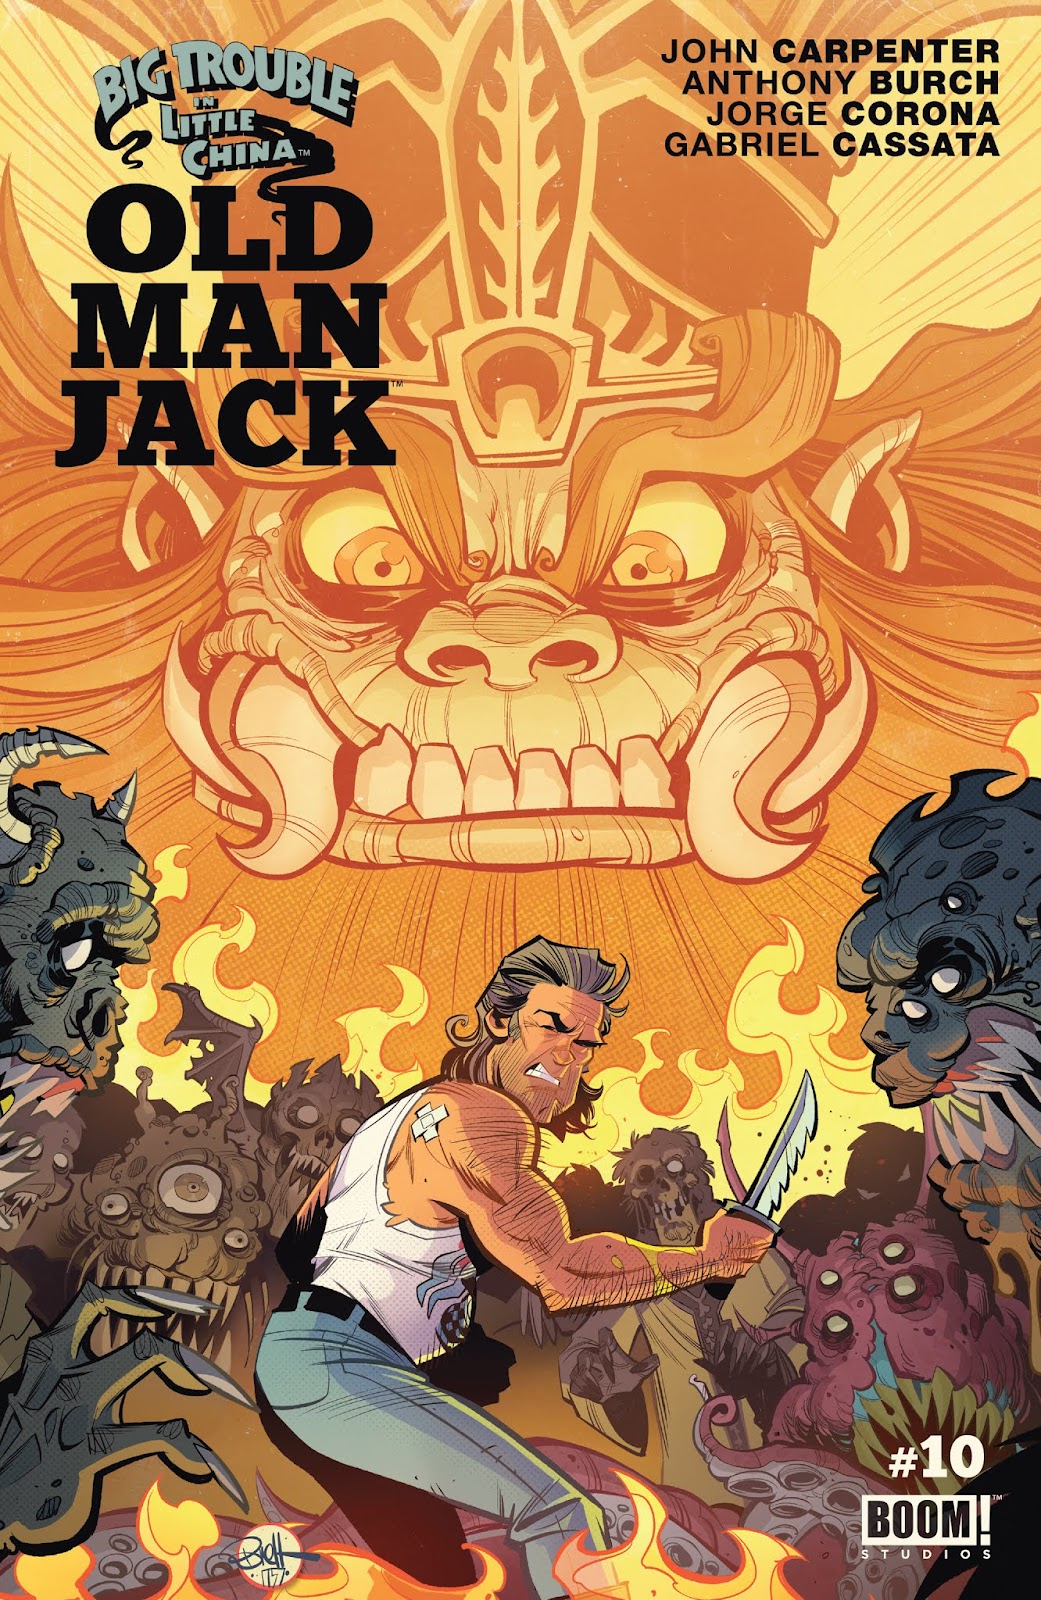 Big Trouble in Little China: Old Man Jack issue 10 - Page 1